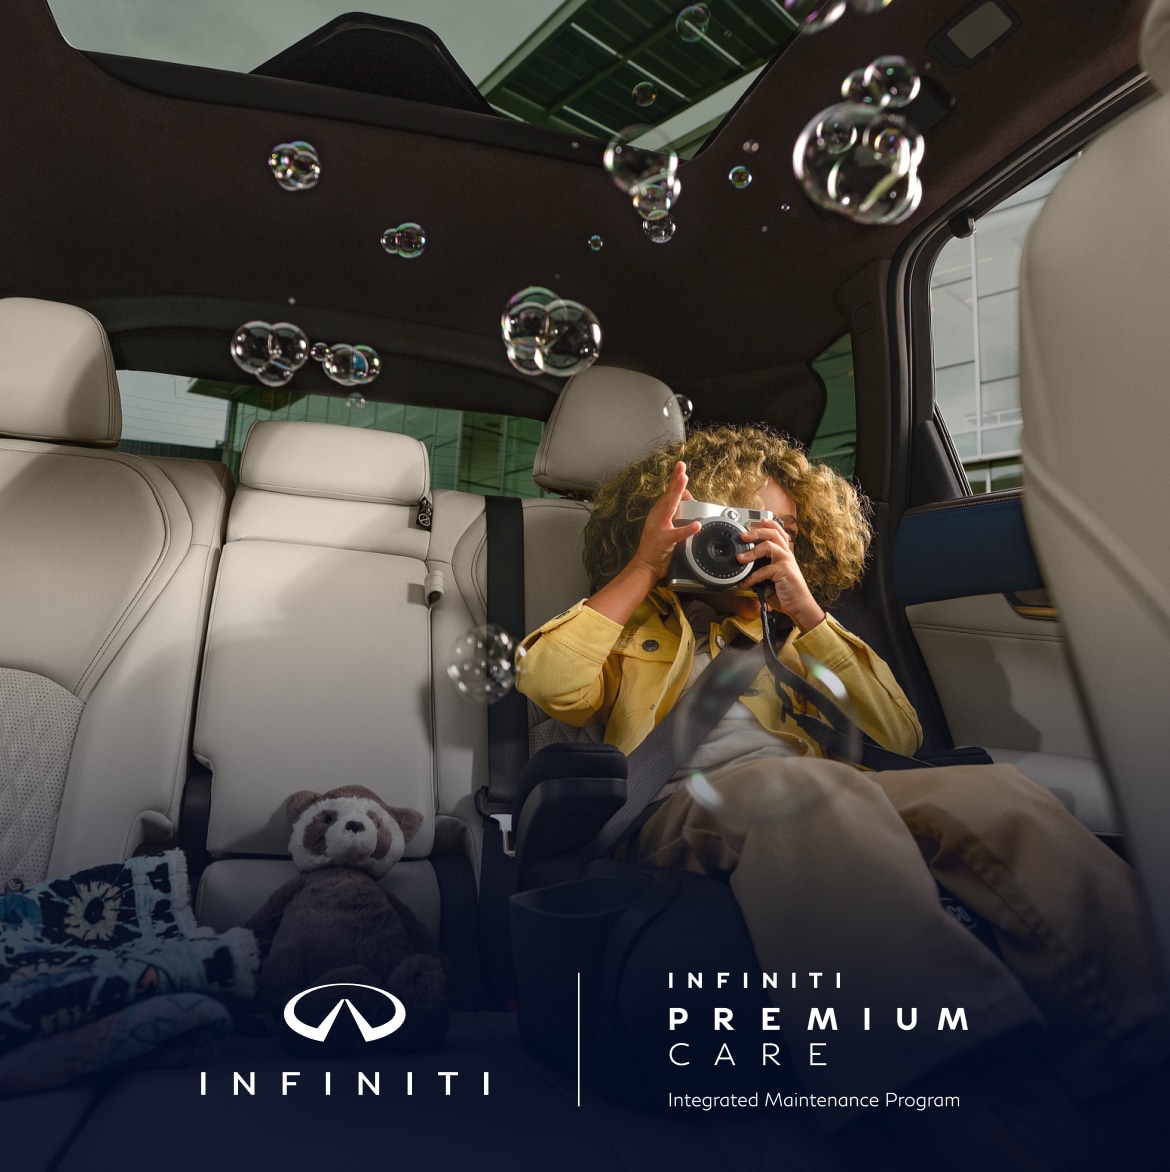 INFINITI QX50 interior with child taking photo of bubbles